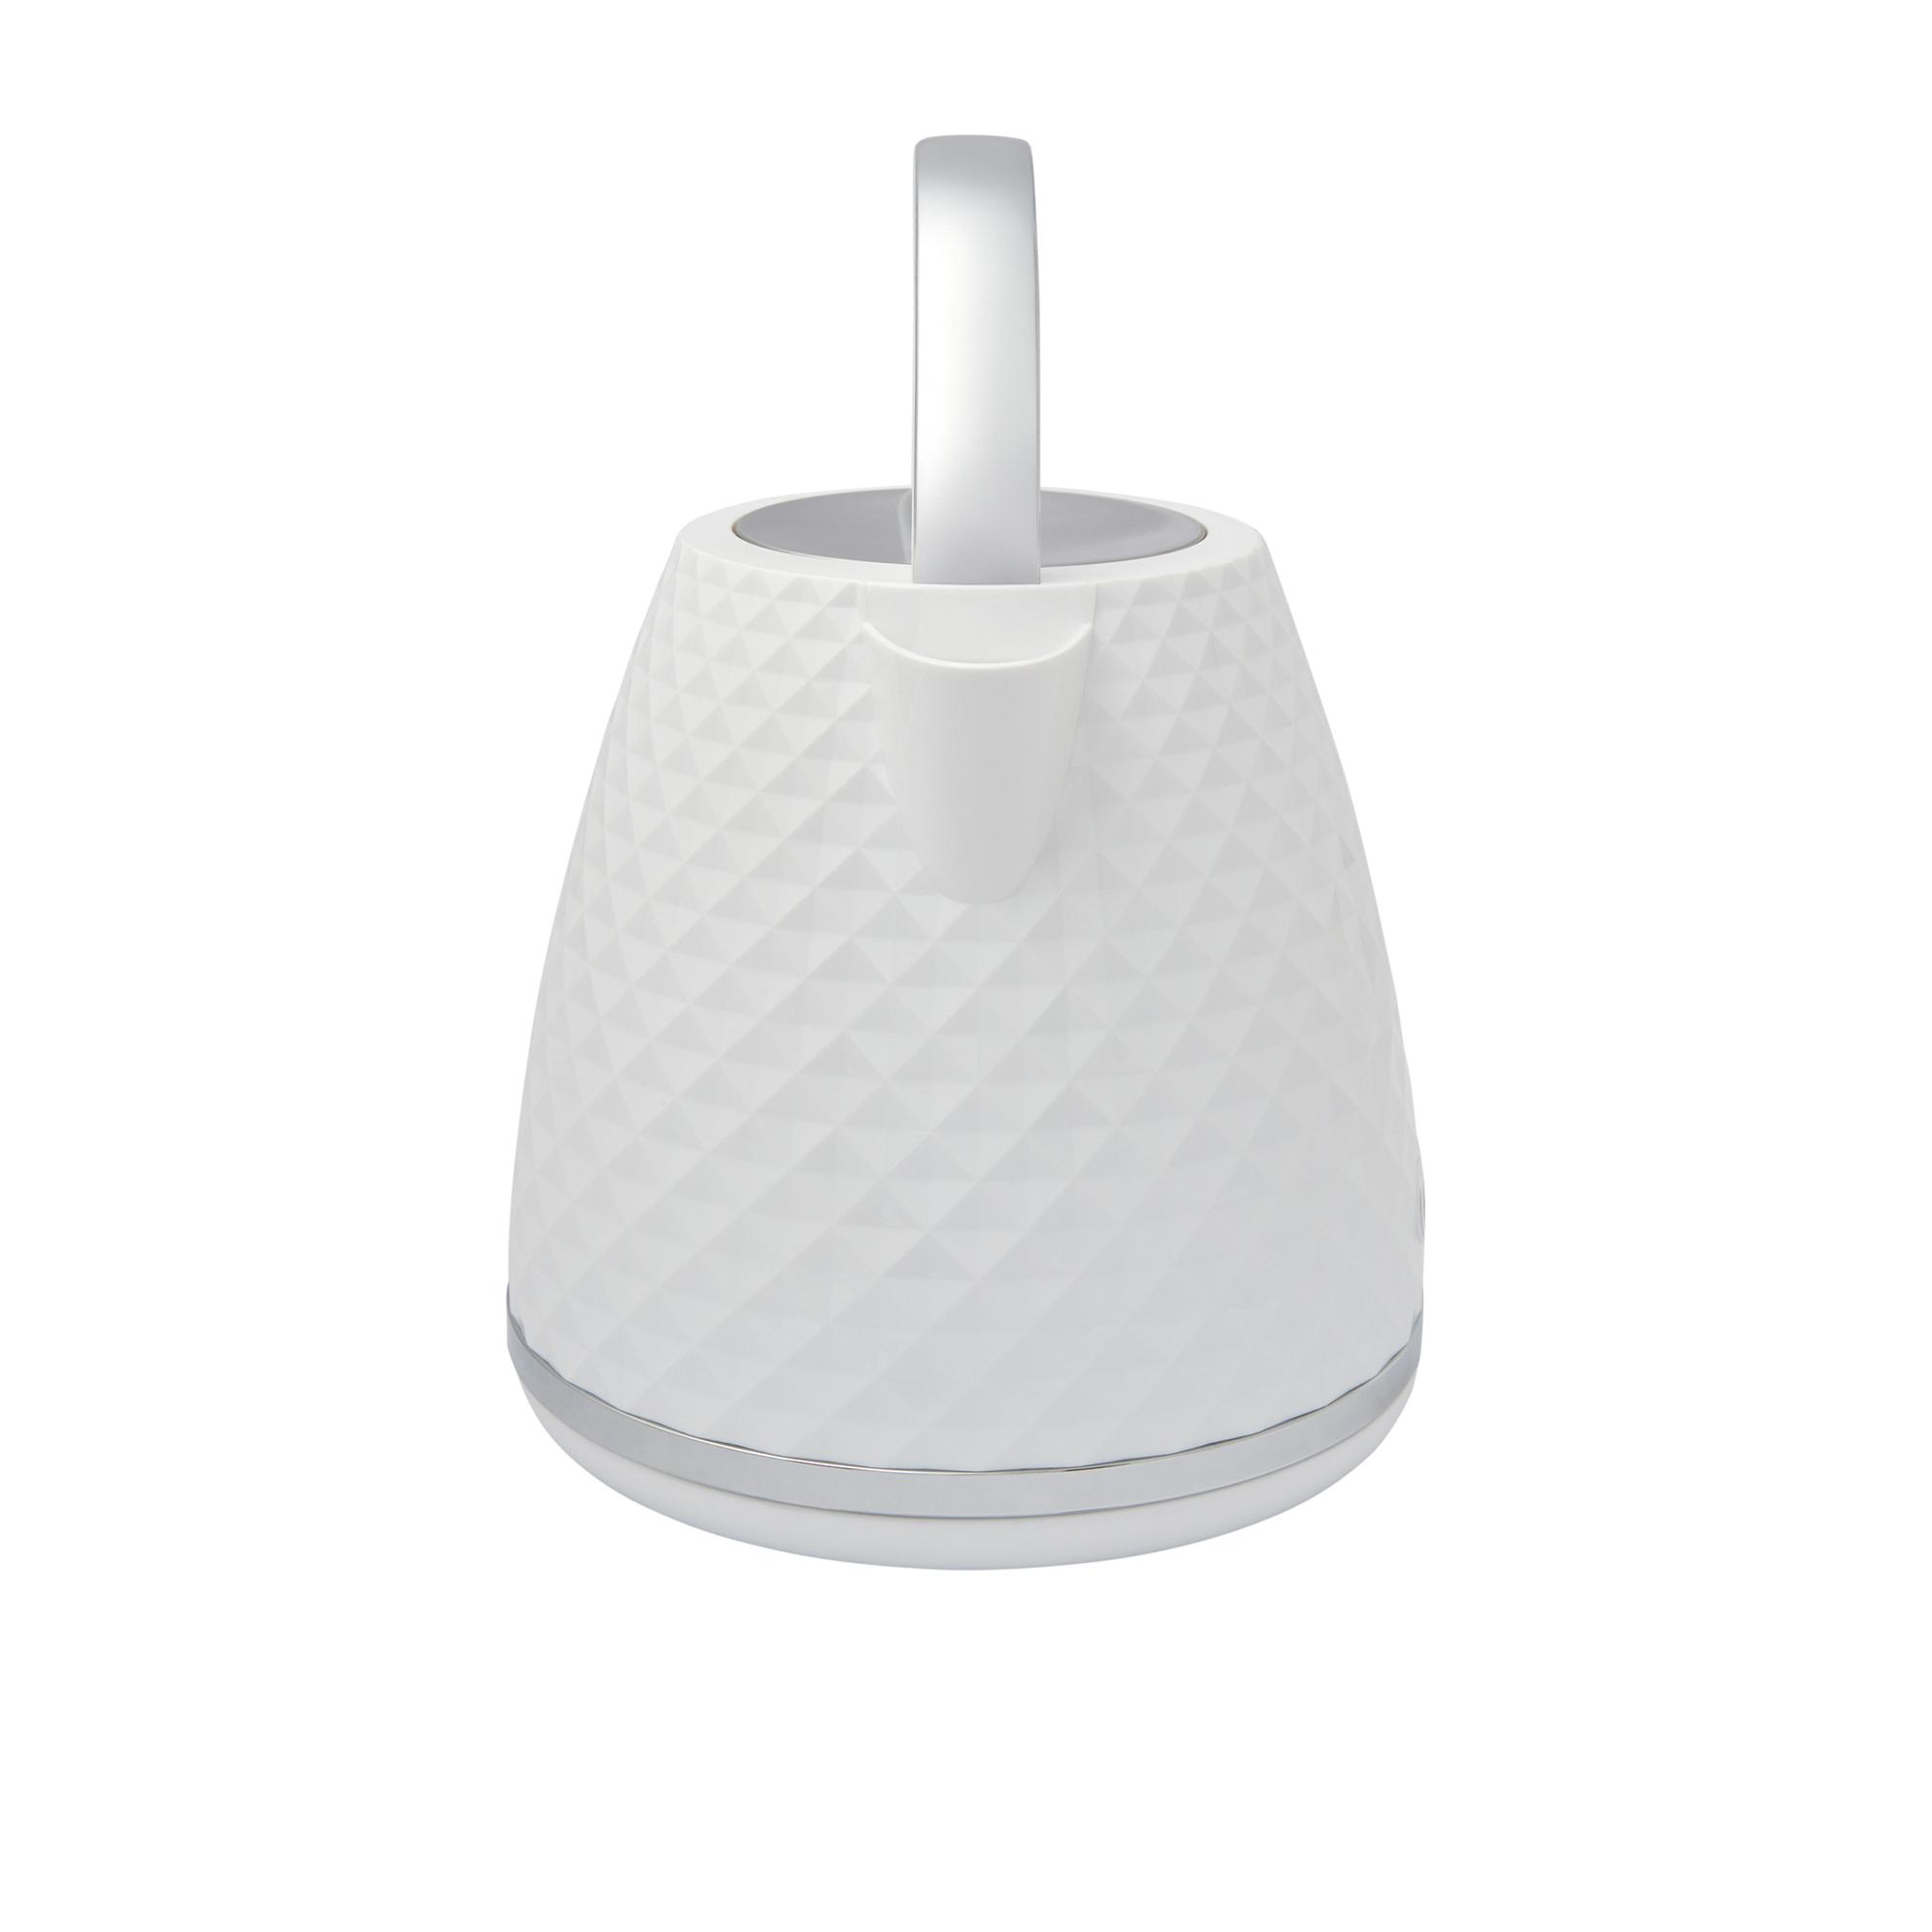 Westinghouse Kettle and Toaster Pack White - Diamond Pattern Image 6